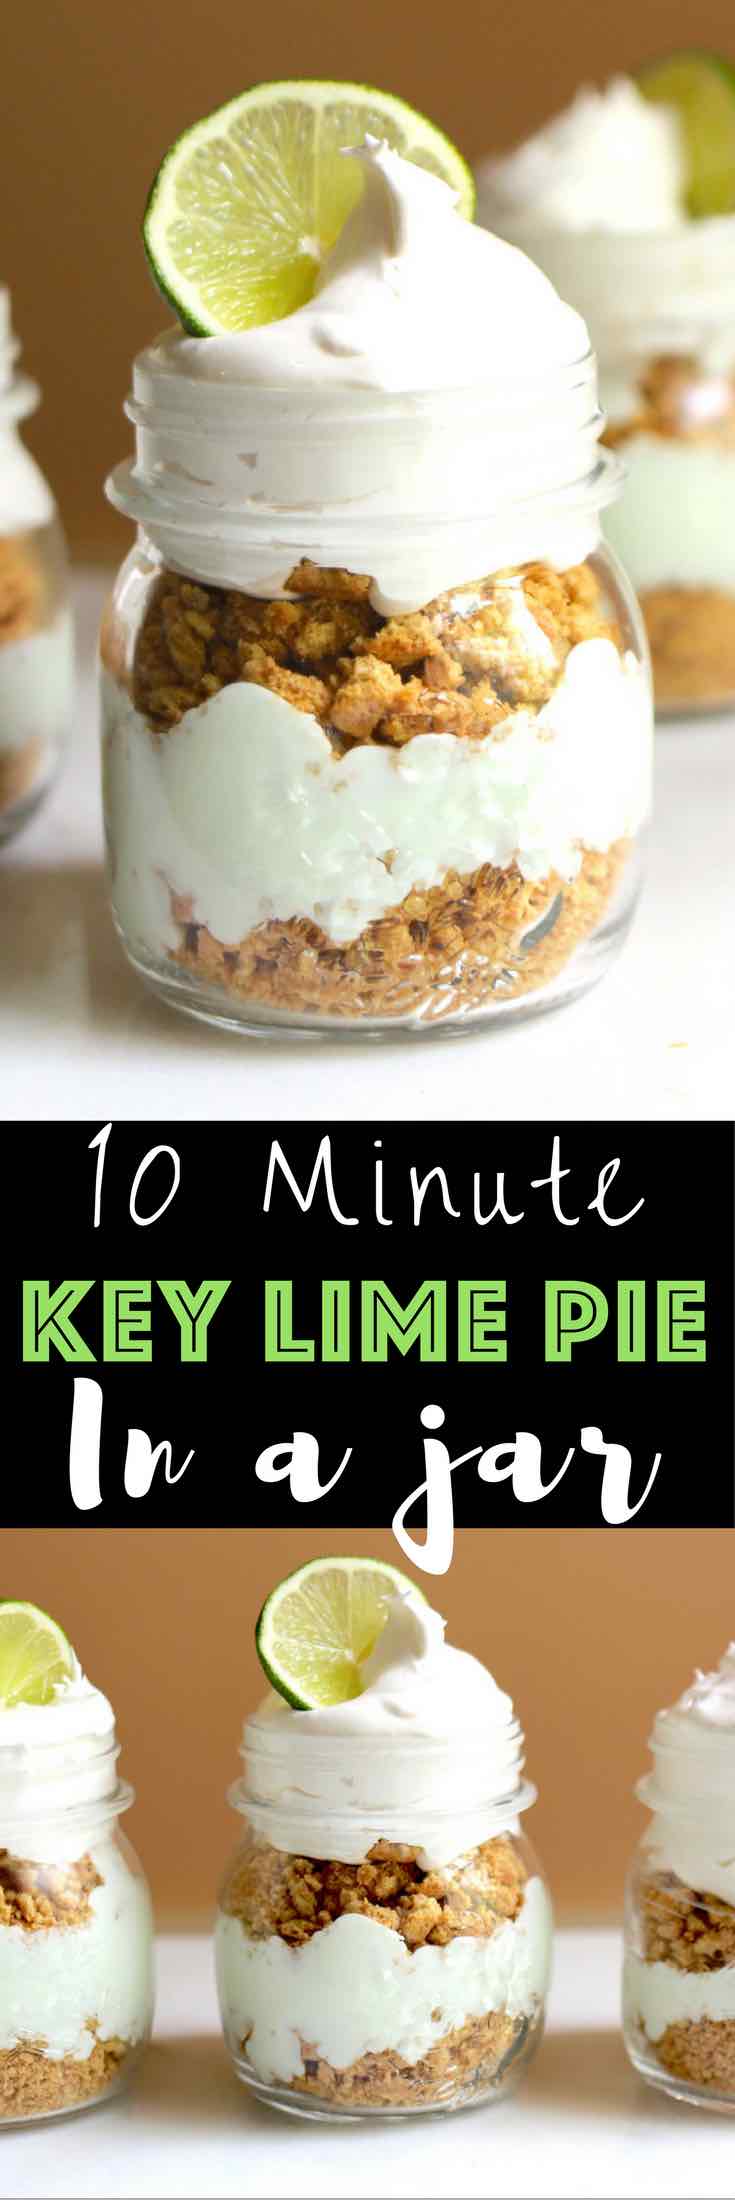 No Bake Key Lime Pie In A Jar – smooth, creamy and tangy key lime cheesecake layered between crunchy crashed graham crackers. Served in individual mason jars. It’s so easy and comes together in 10 minutes. All you need is a few simple ingredients: crushed graham crackers, butter, cream cheese, condensed milk, vanilla greek yogurt, key lime juice, green food coloring, whipped topping and slices of lime to garnish. So good! Quick and easy, no bake dessert, vegetarian. Video recipe. | tipbuzz.com